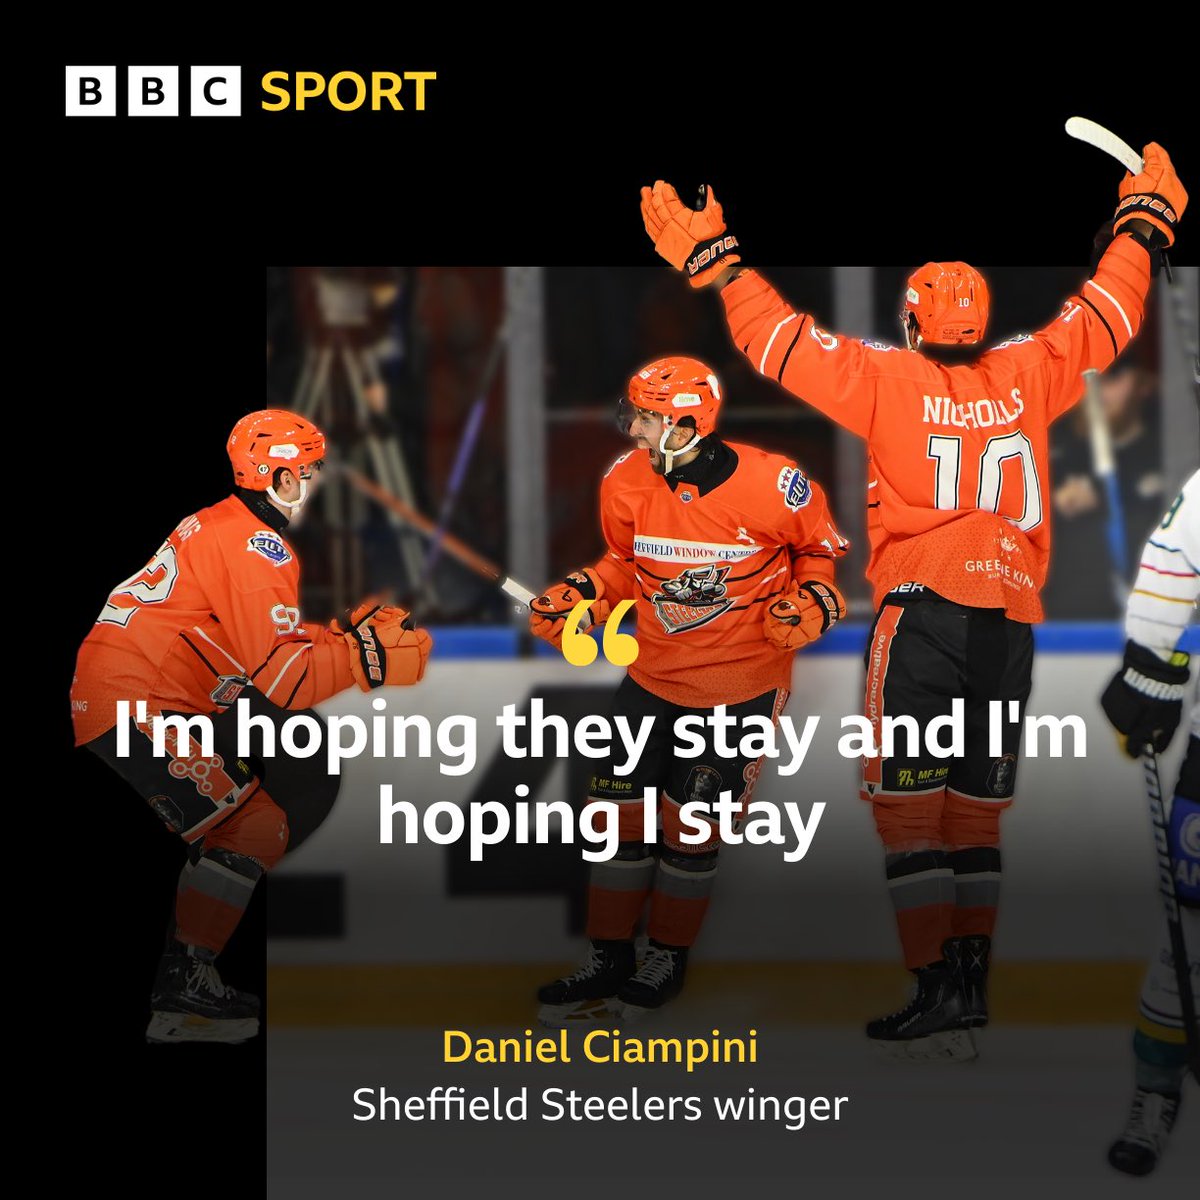 VIDEO: Sheffield Steelers winger Daniel Ciampini speaks after securing the club’s first Grand Slam in 23 years! The Canadian talks about next season and the potential of returning to the club for a third season. Watch here ➡️bbc.co.uk/programmes/p0h…